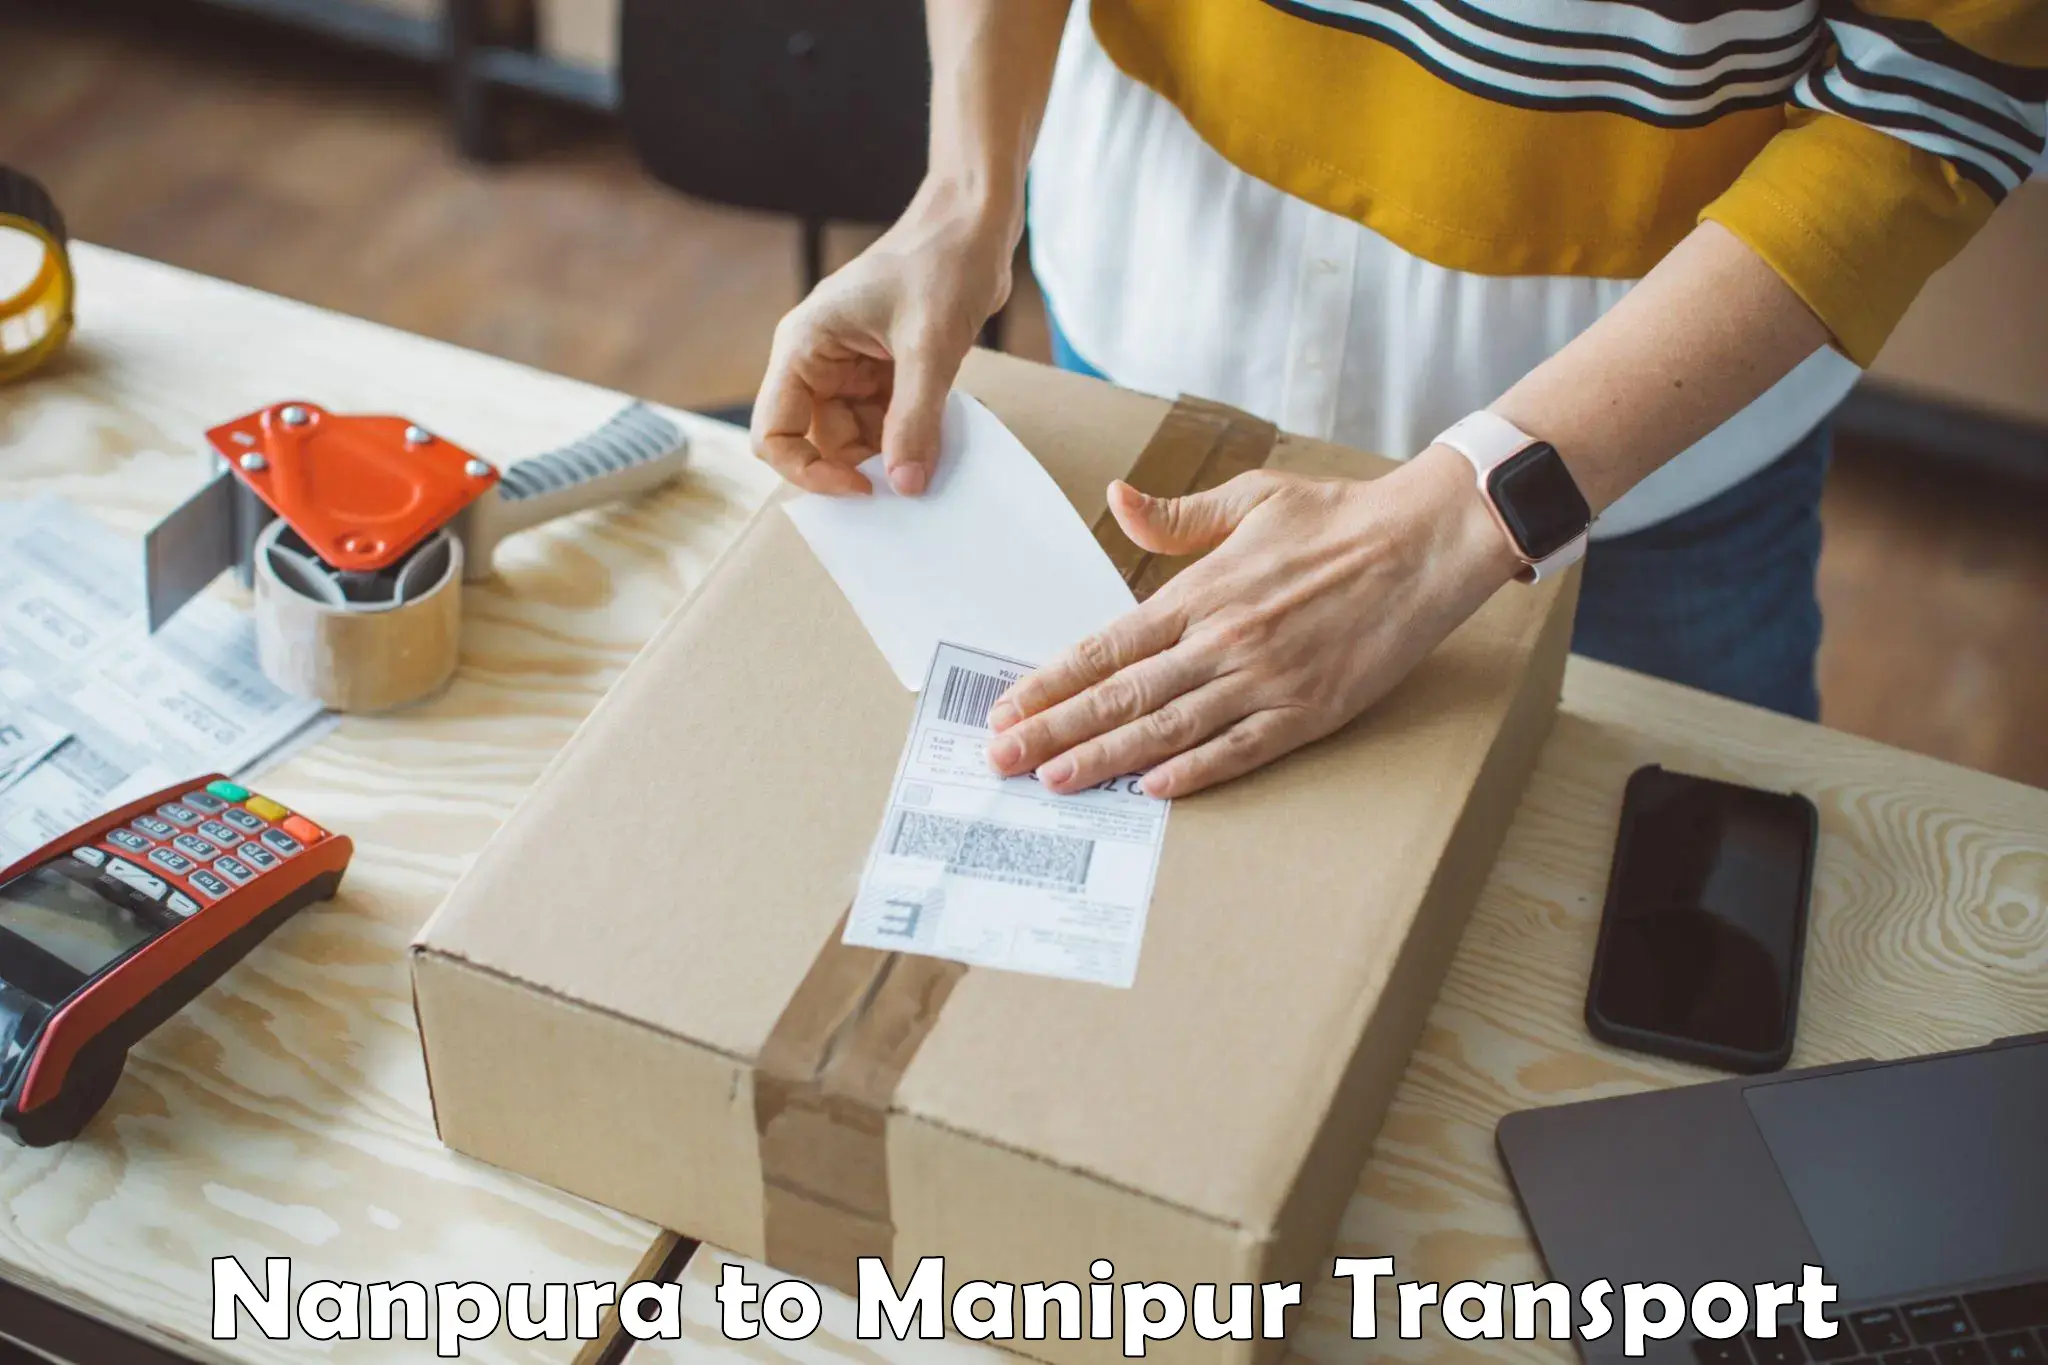 Nearby transport service Nanpura to Manipur